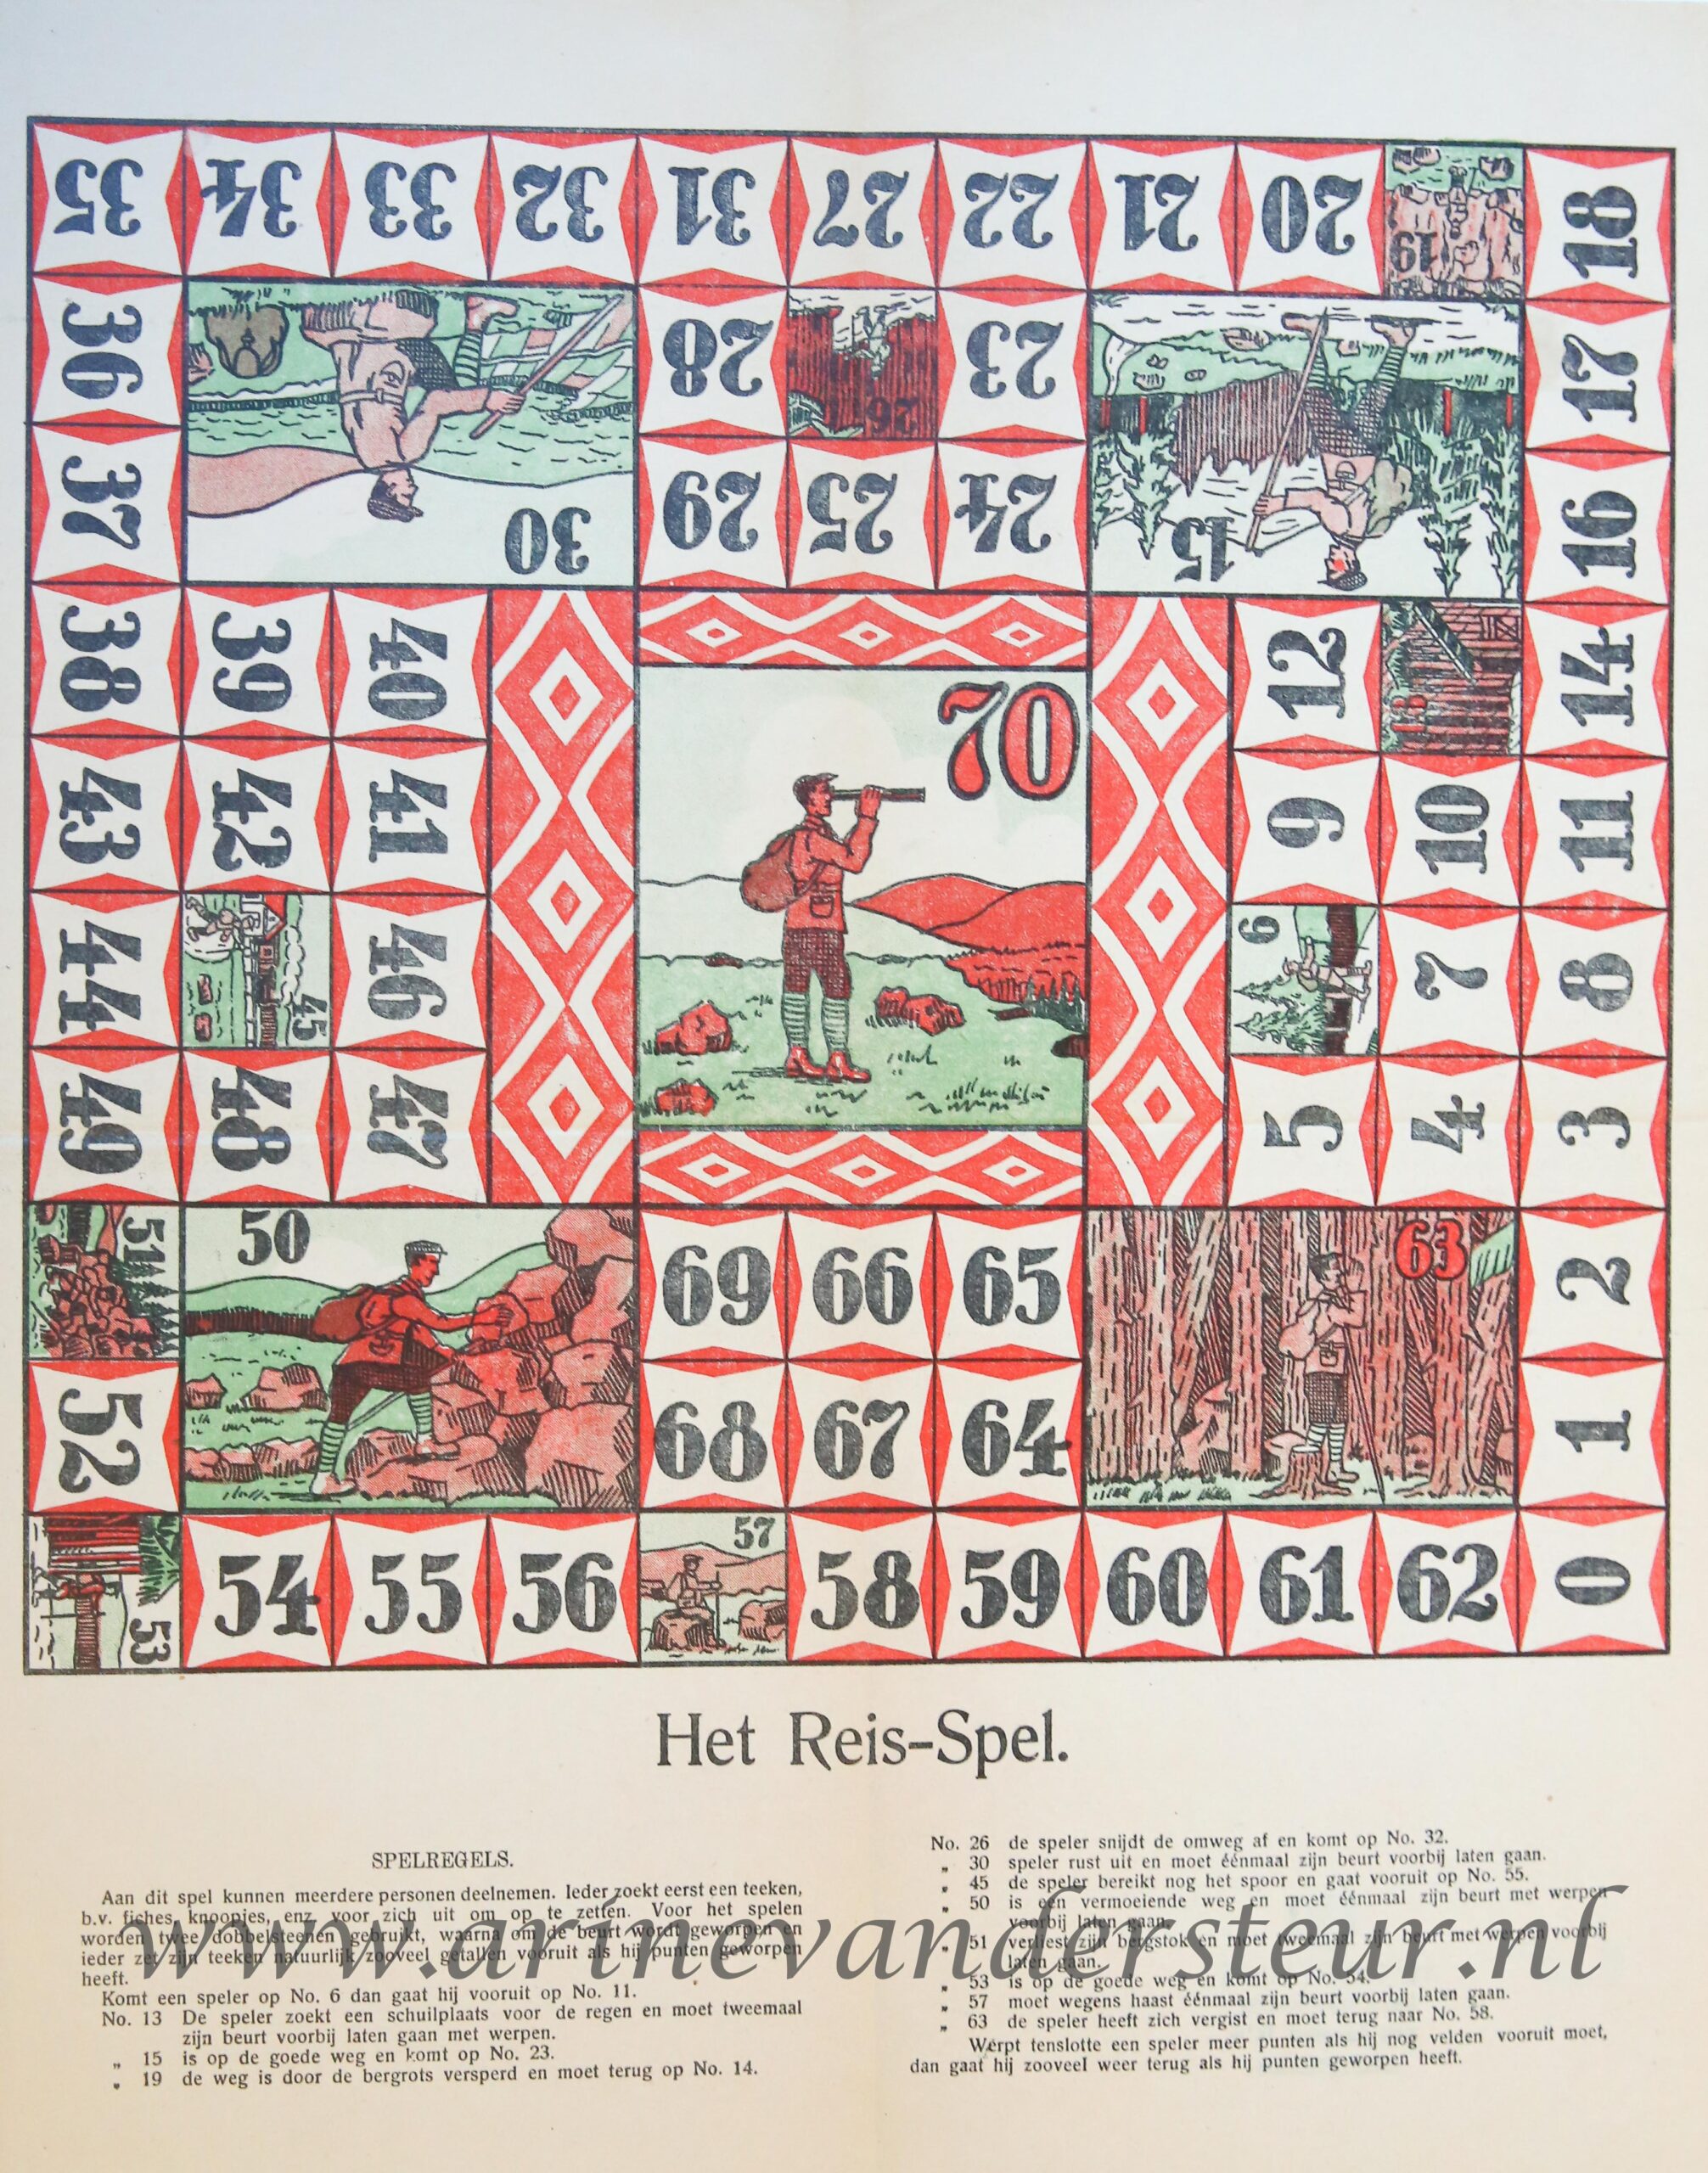 [Moden game, board game, lithography] Het Reis-Spel, published ca. 1920-1930.